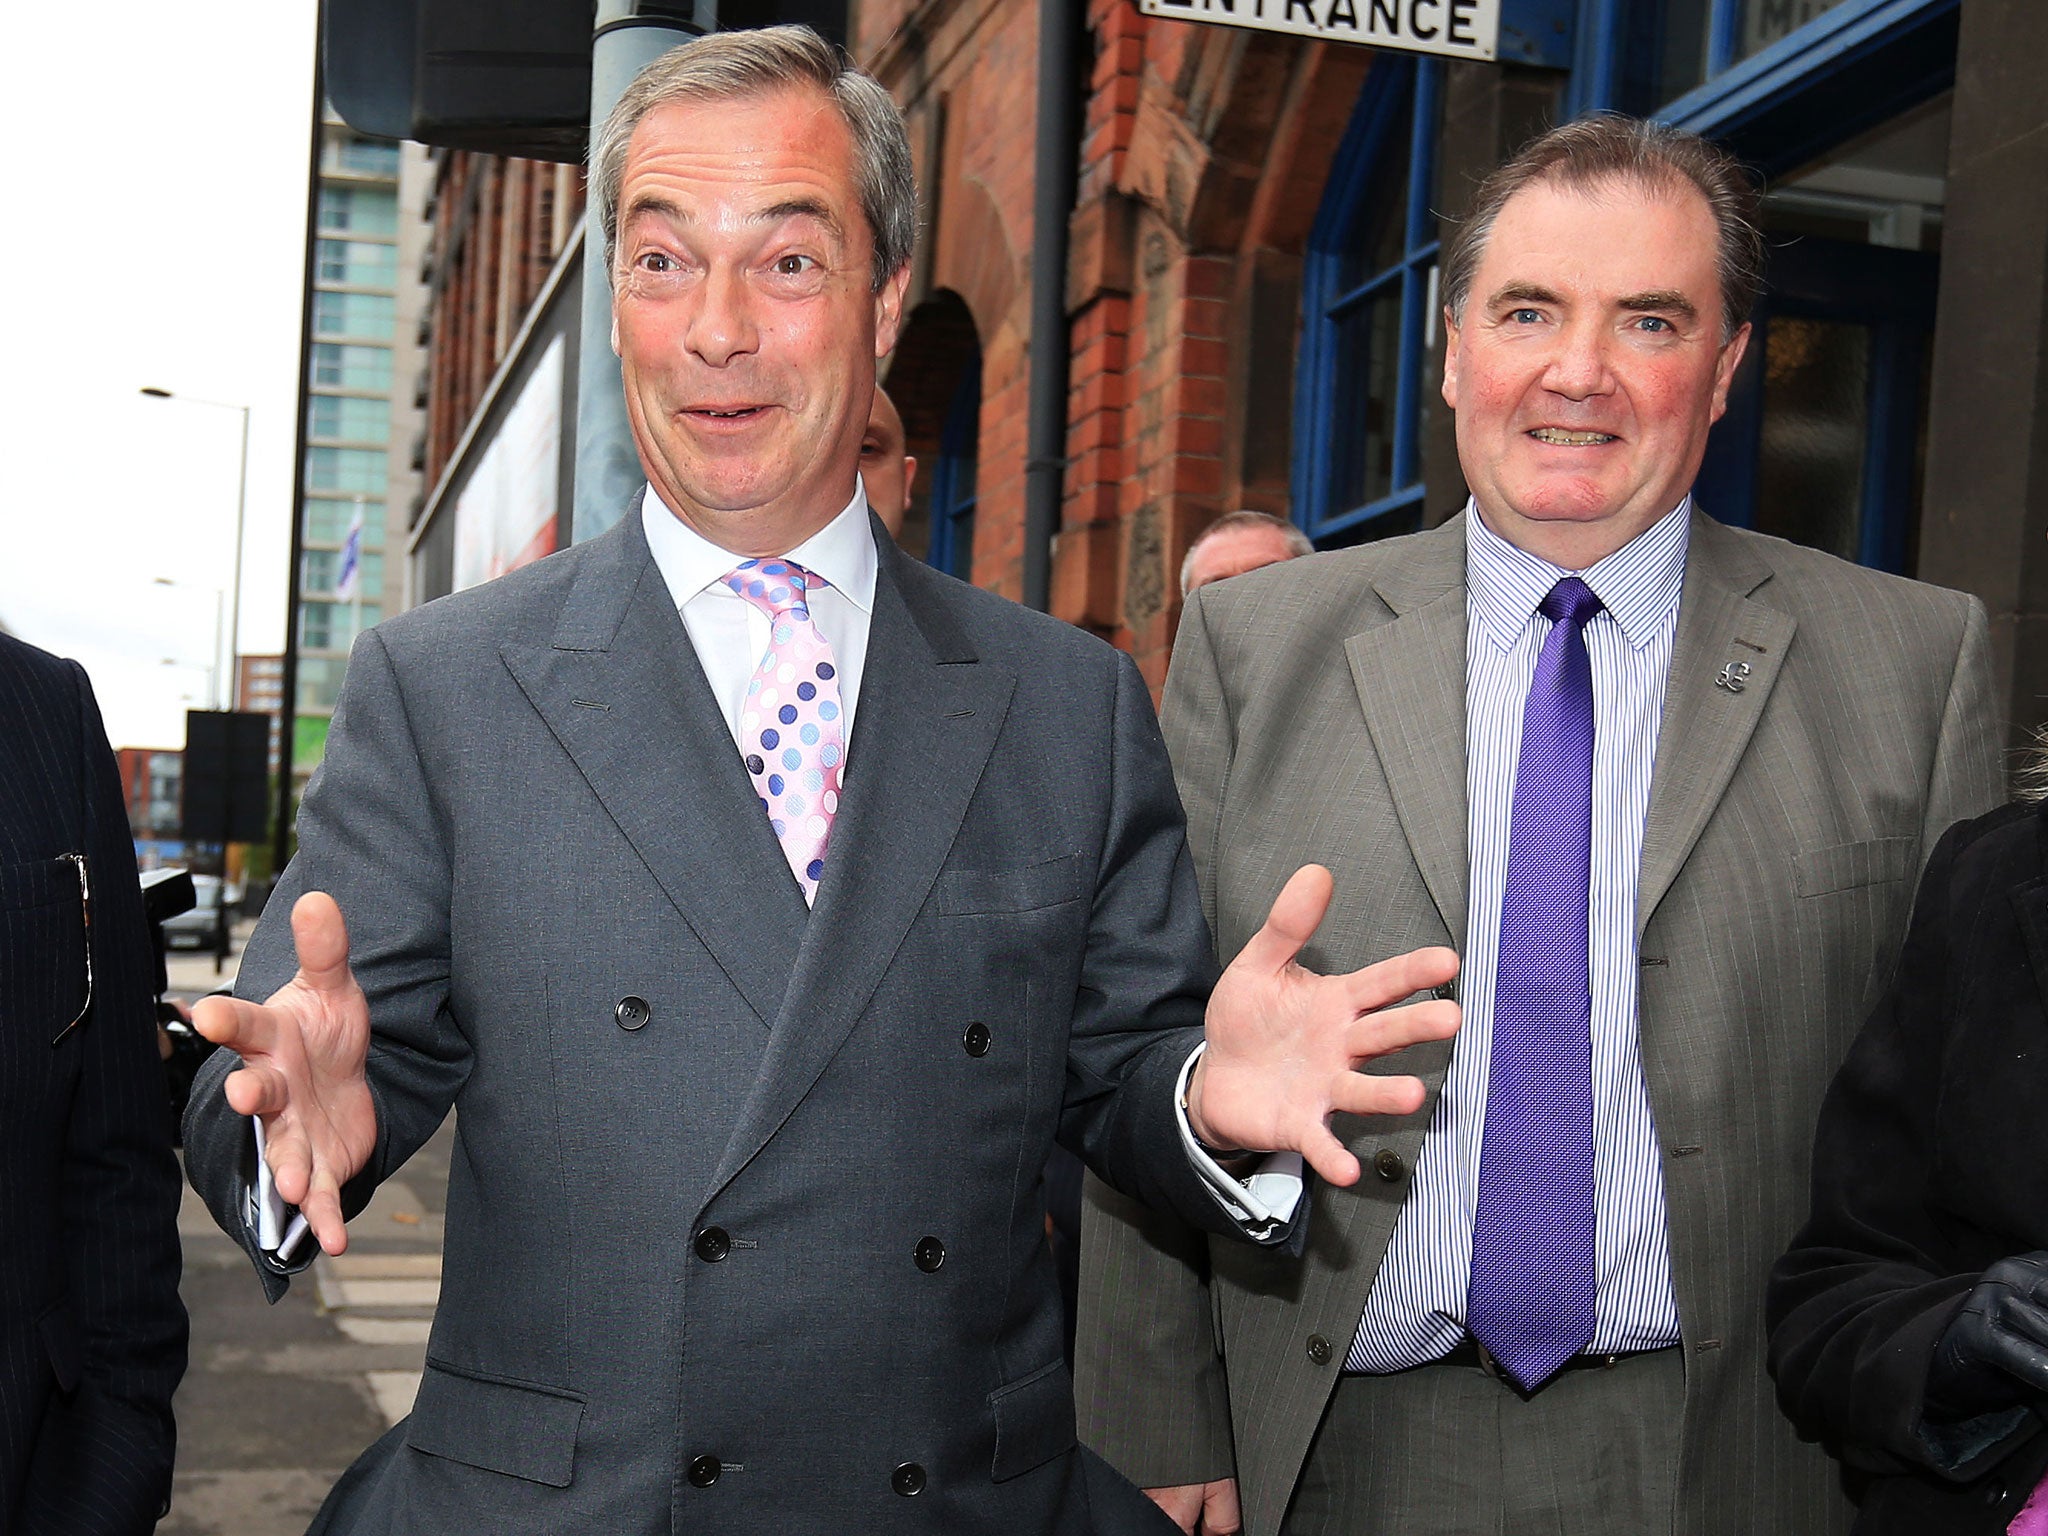 Jack Clarkson, the police commissioner candidate, right, campaigns with the Ukip leader Nigel Farage in Sheffield